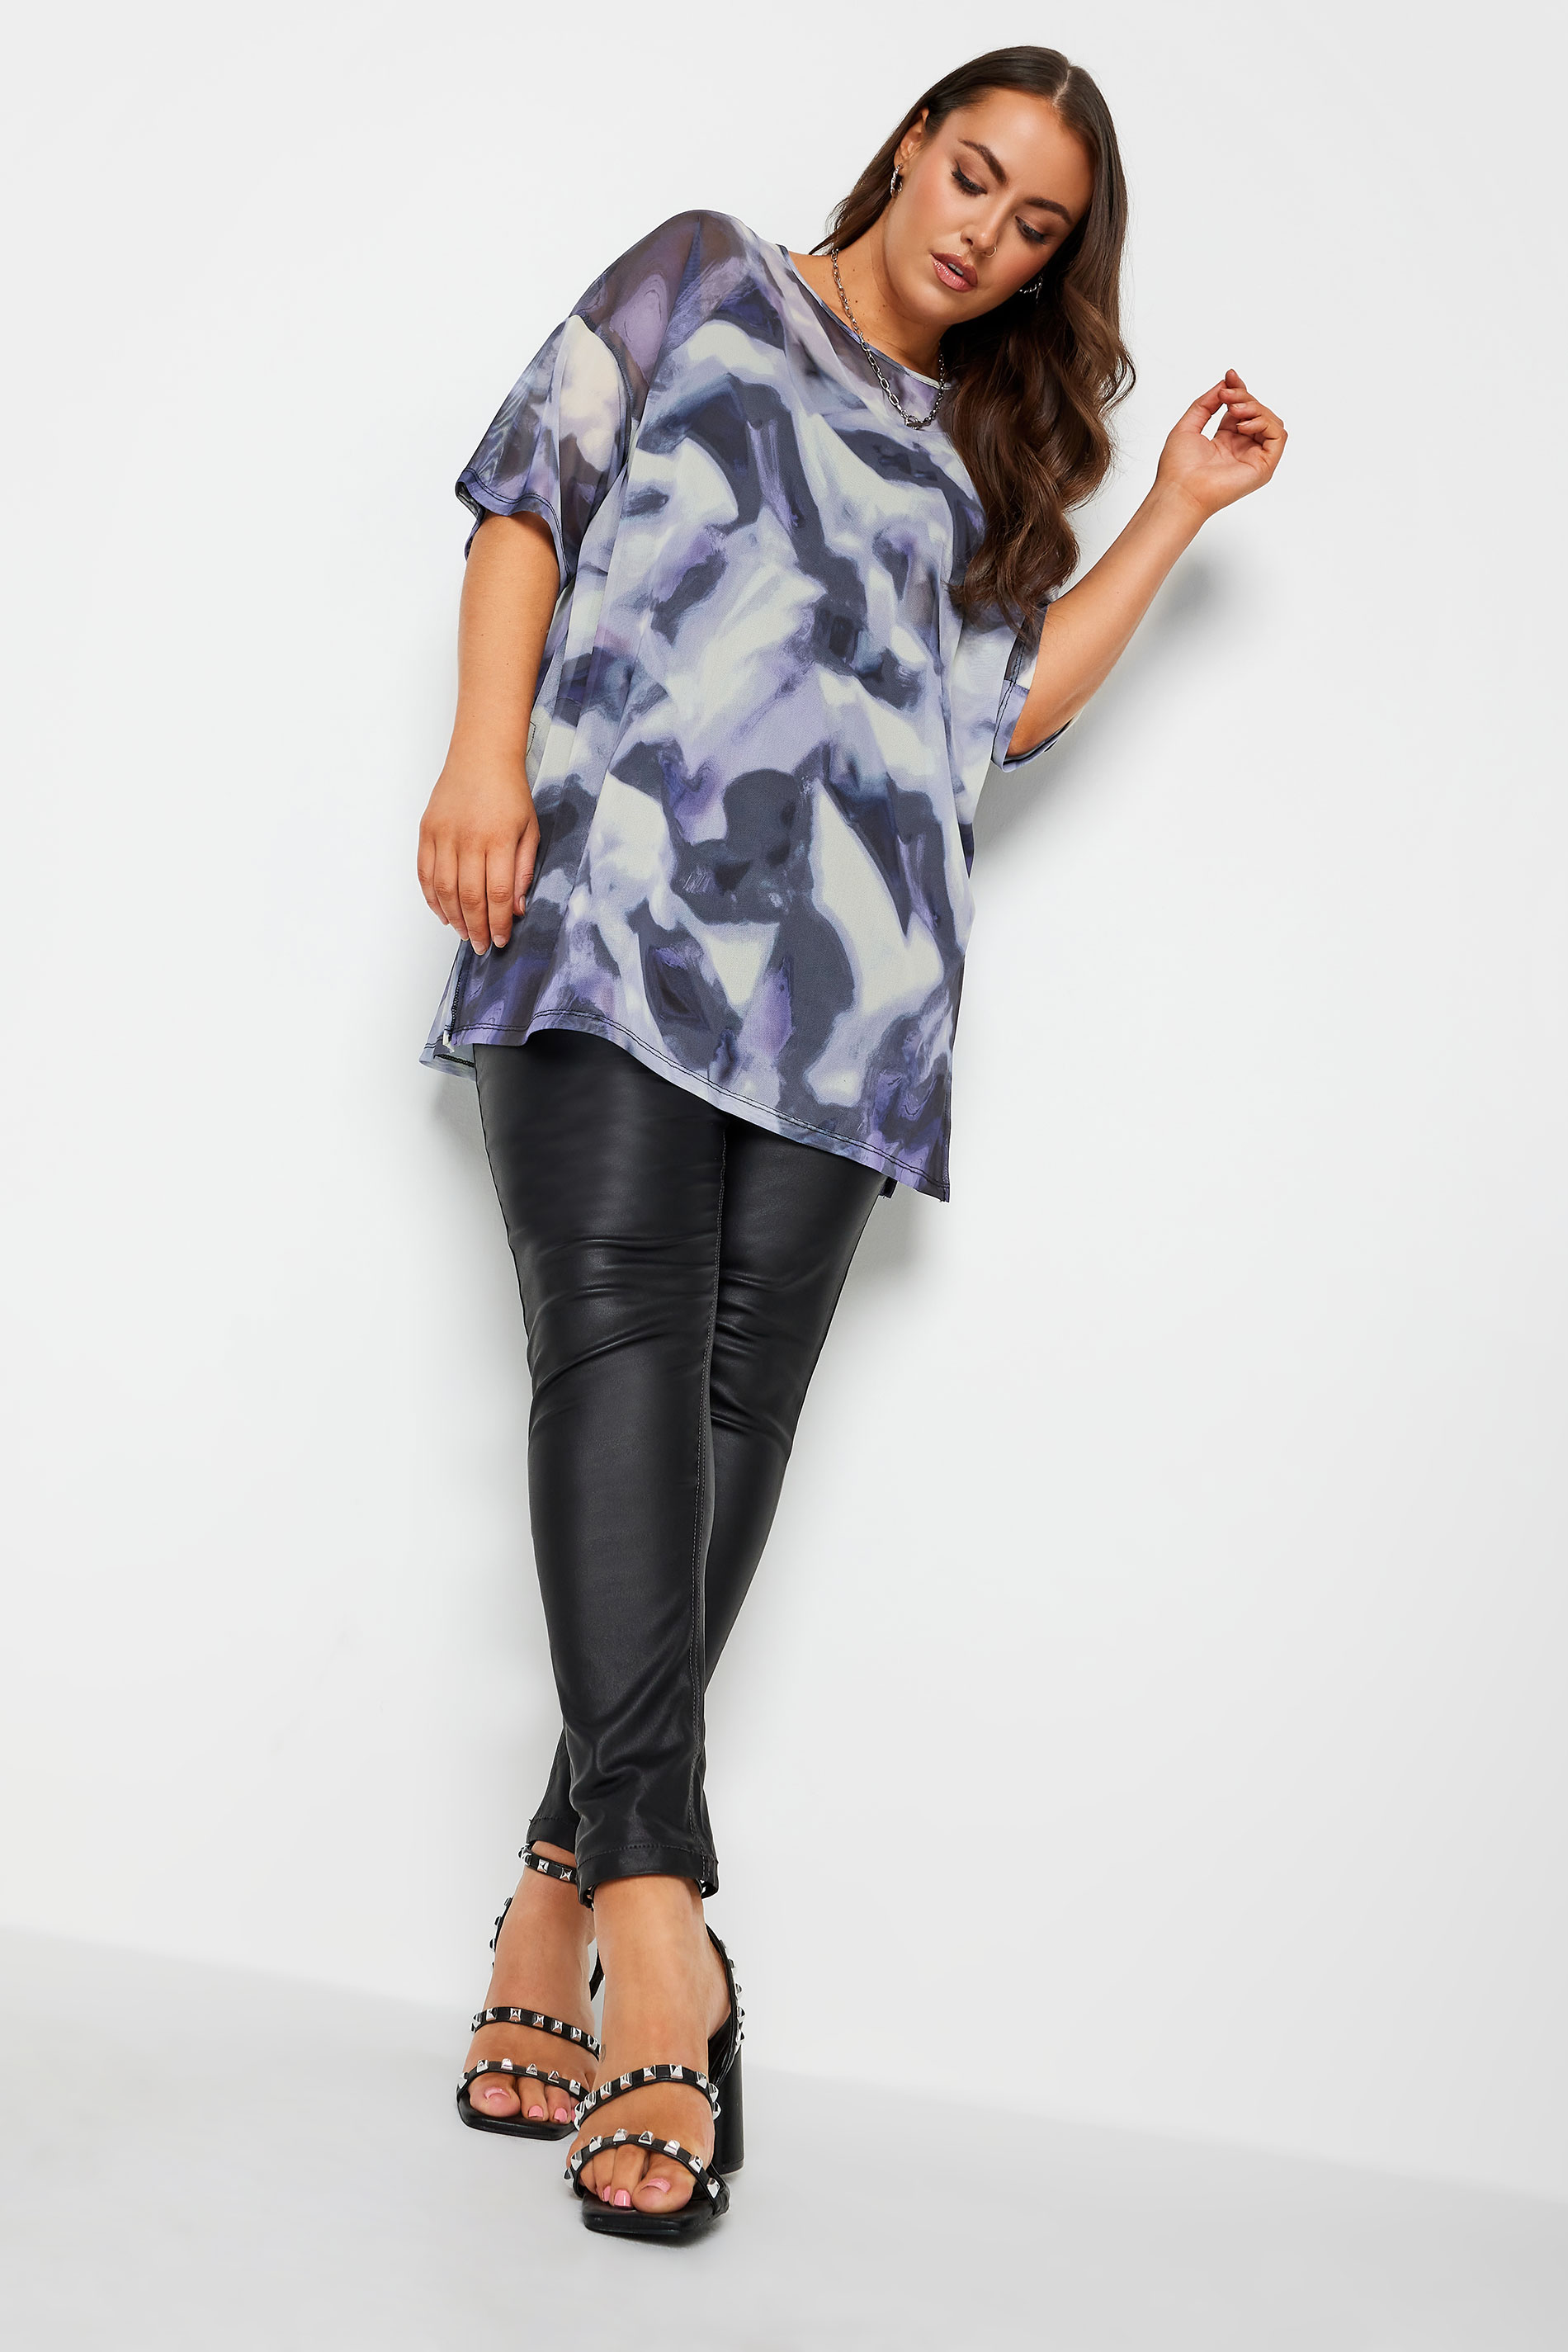 LIMITED COLLECTION Plus Size Black Abstract Print Oversized Mesh Top | Yours Clothing 2